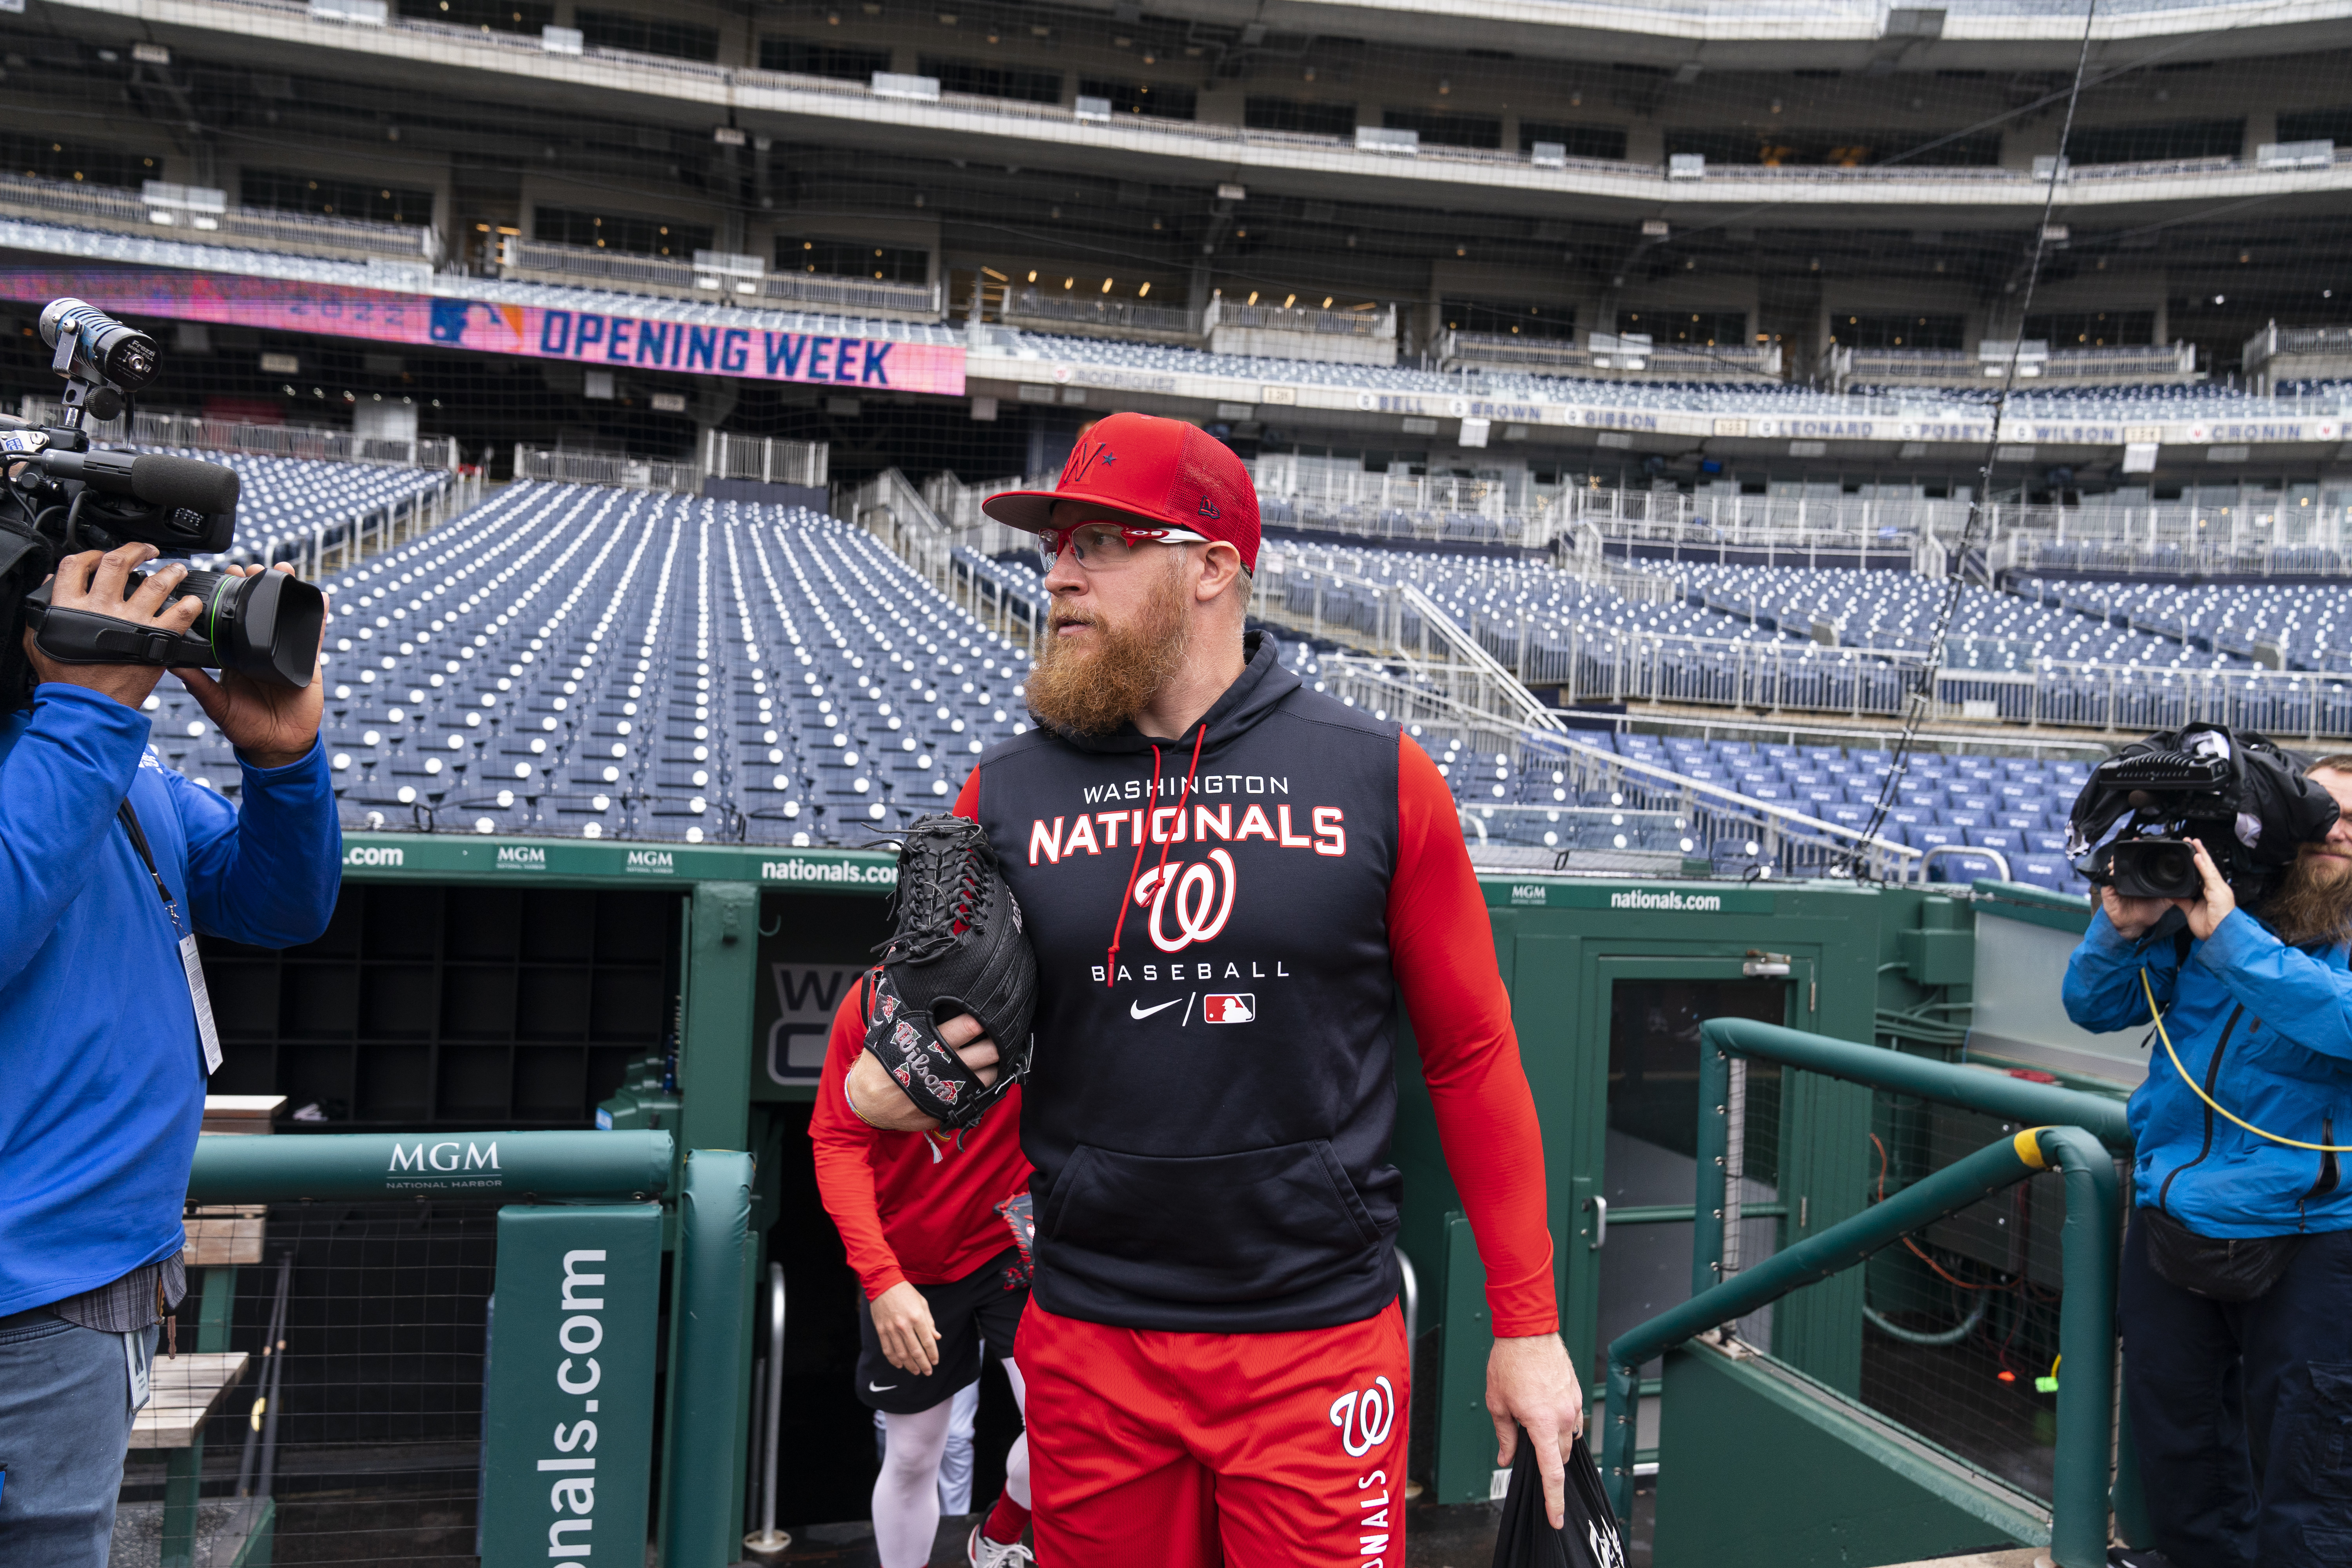 Washington Nationals finalize roster ahead of opening day game vs